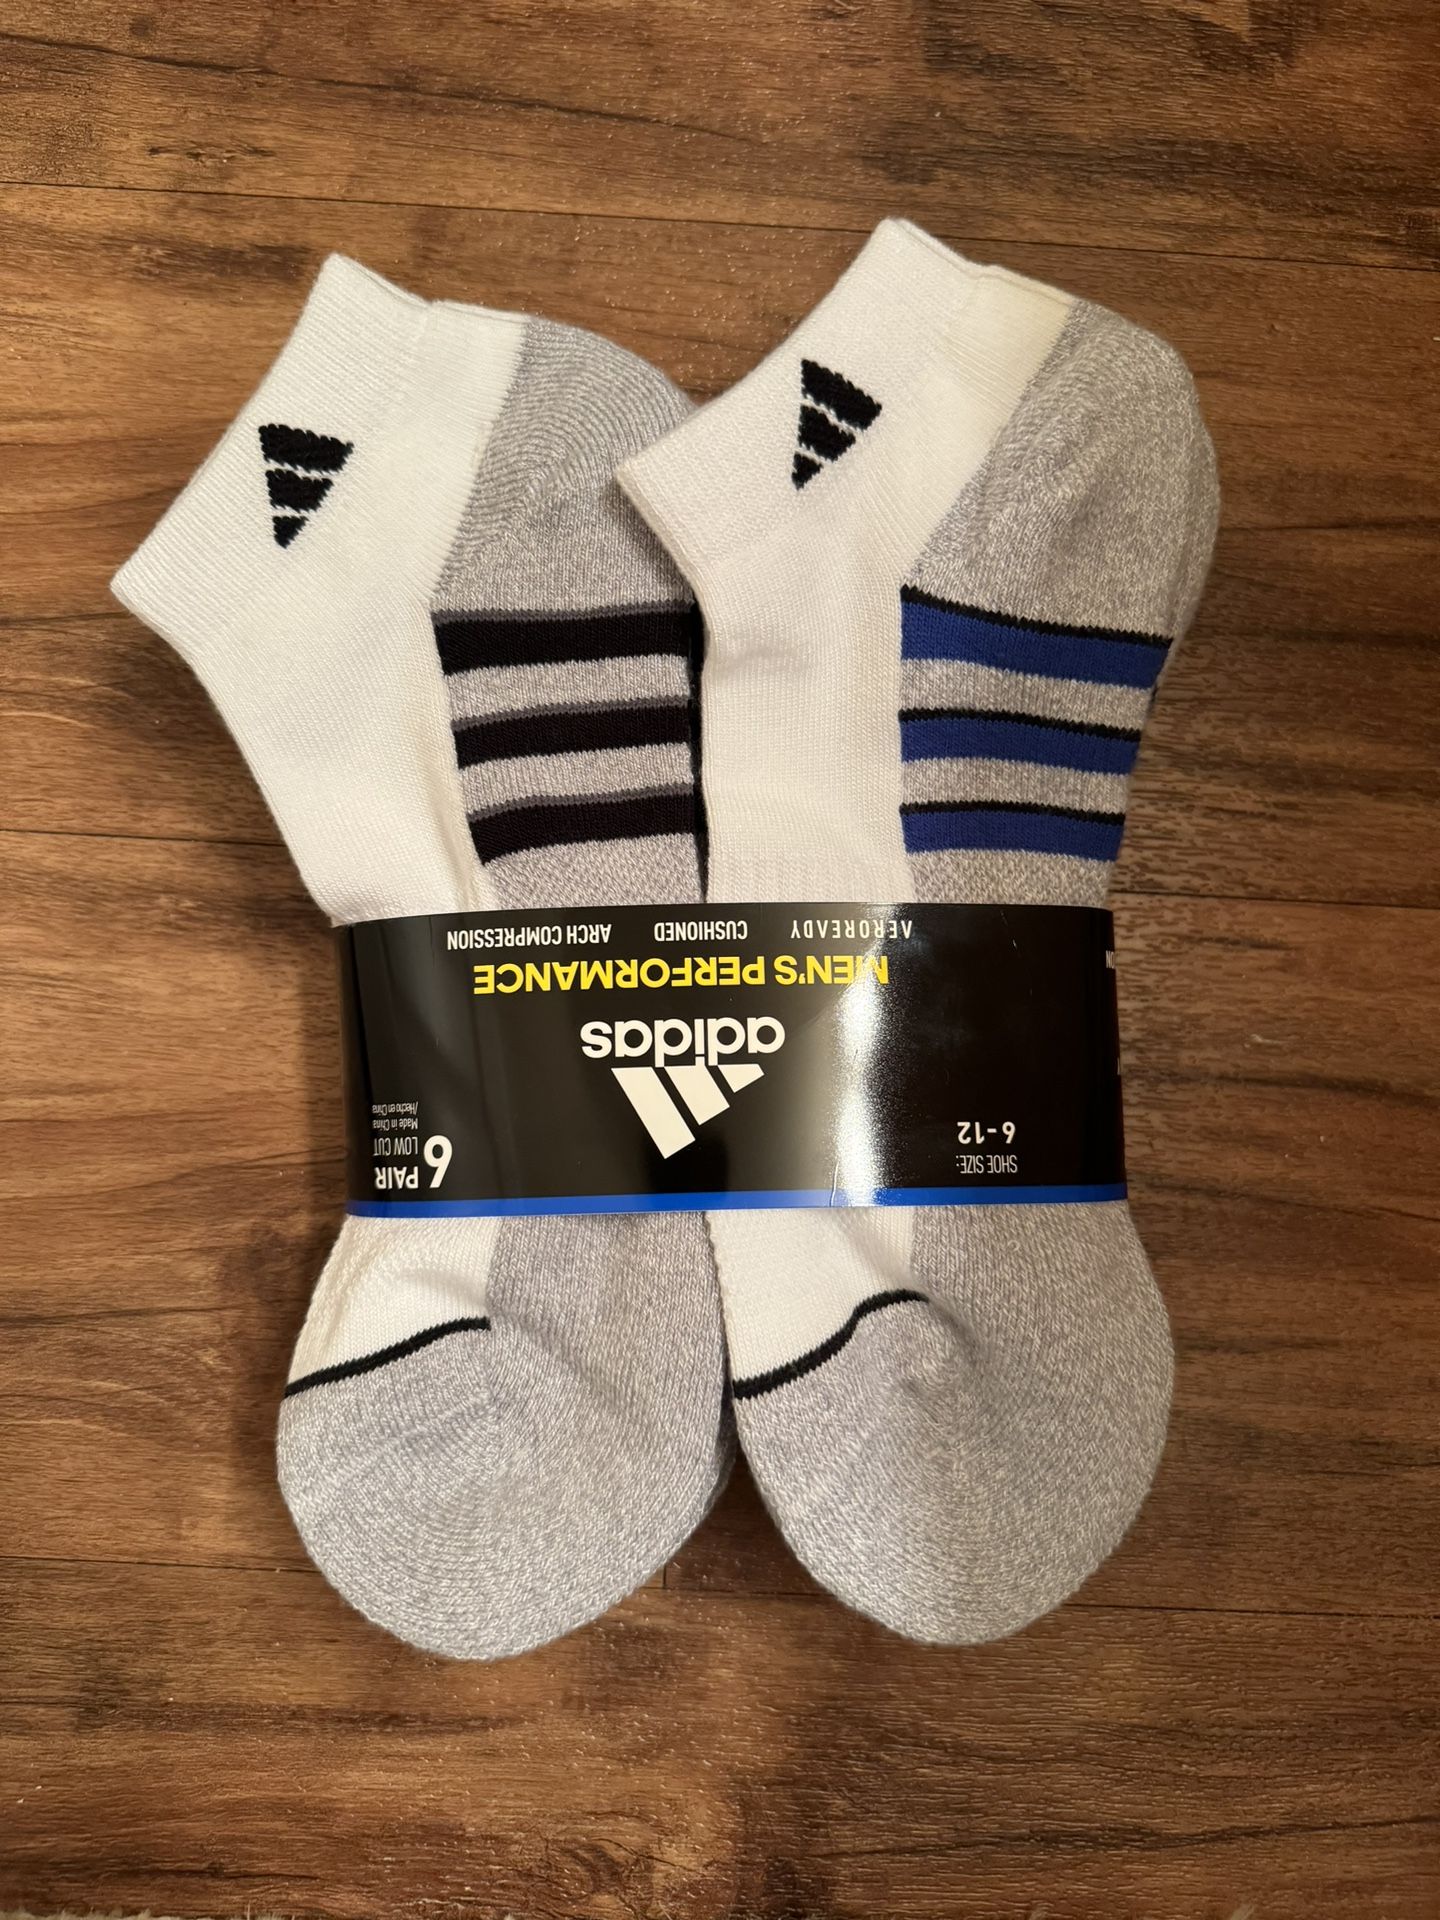 Adidas Men's Cushioned Low Cut Ankle Socks 6 Pairs White Blue Compression 6-12